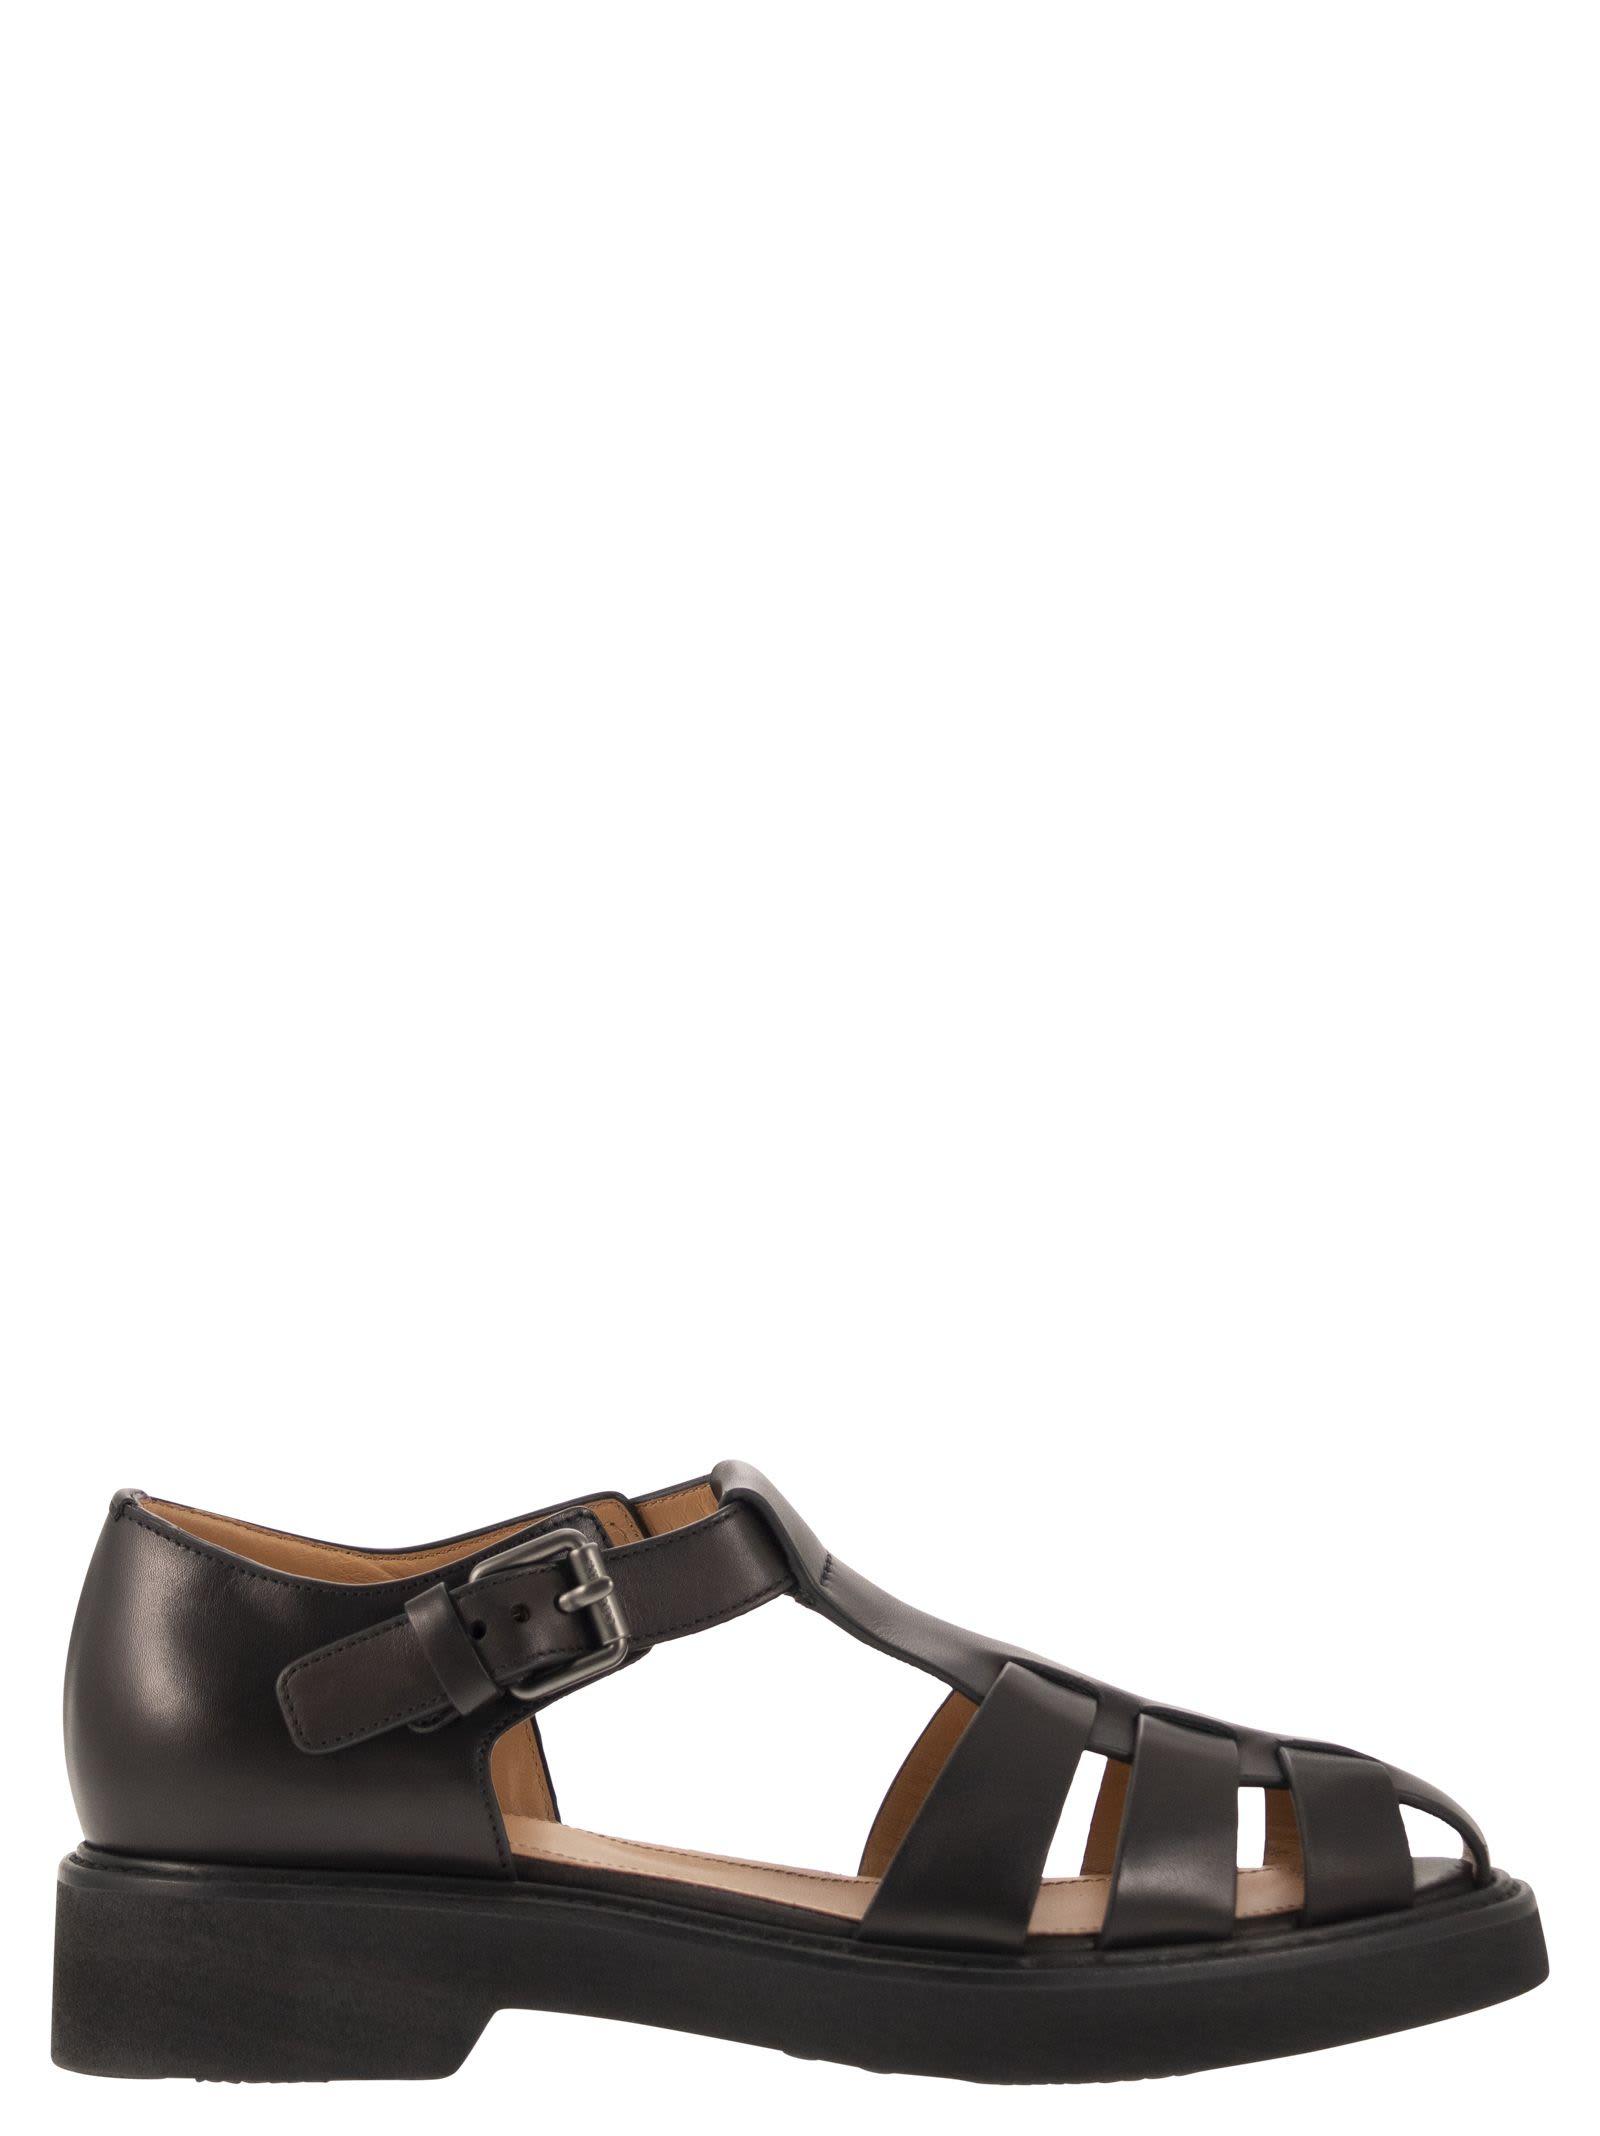 Church's Hove - Leather Sandals in Black | Lyst